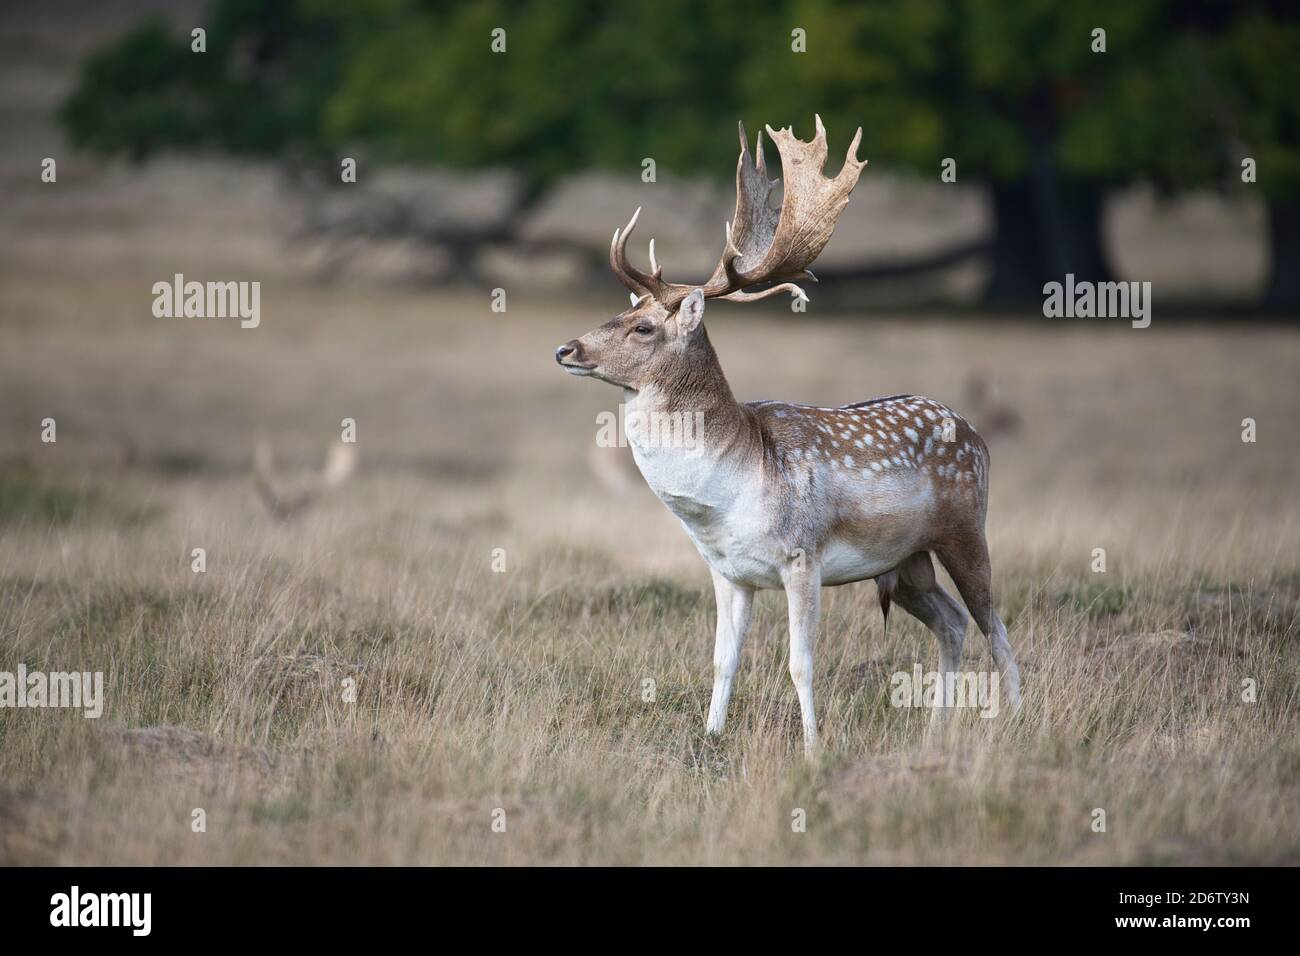 Fallow deer (Dama dama) buck showing the palmate antlers typical of the species Stock Photo